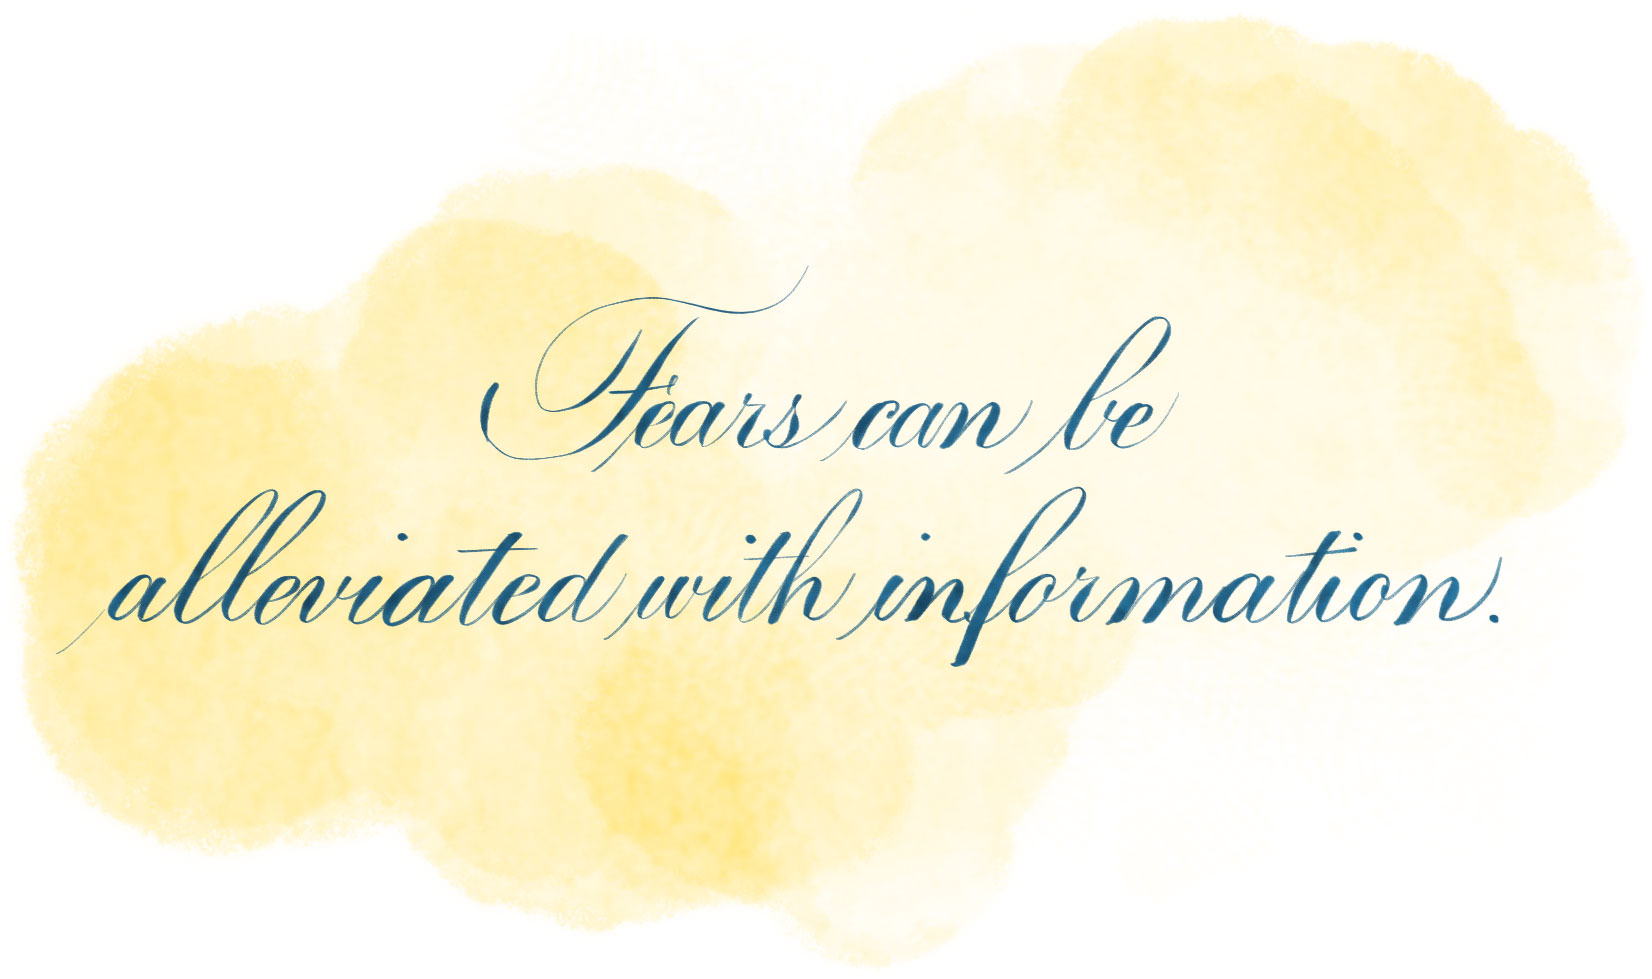 calligraphy pull quote "Fears can be alleviated with information." by Katie Leavens